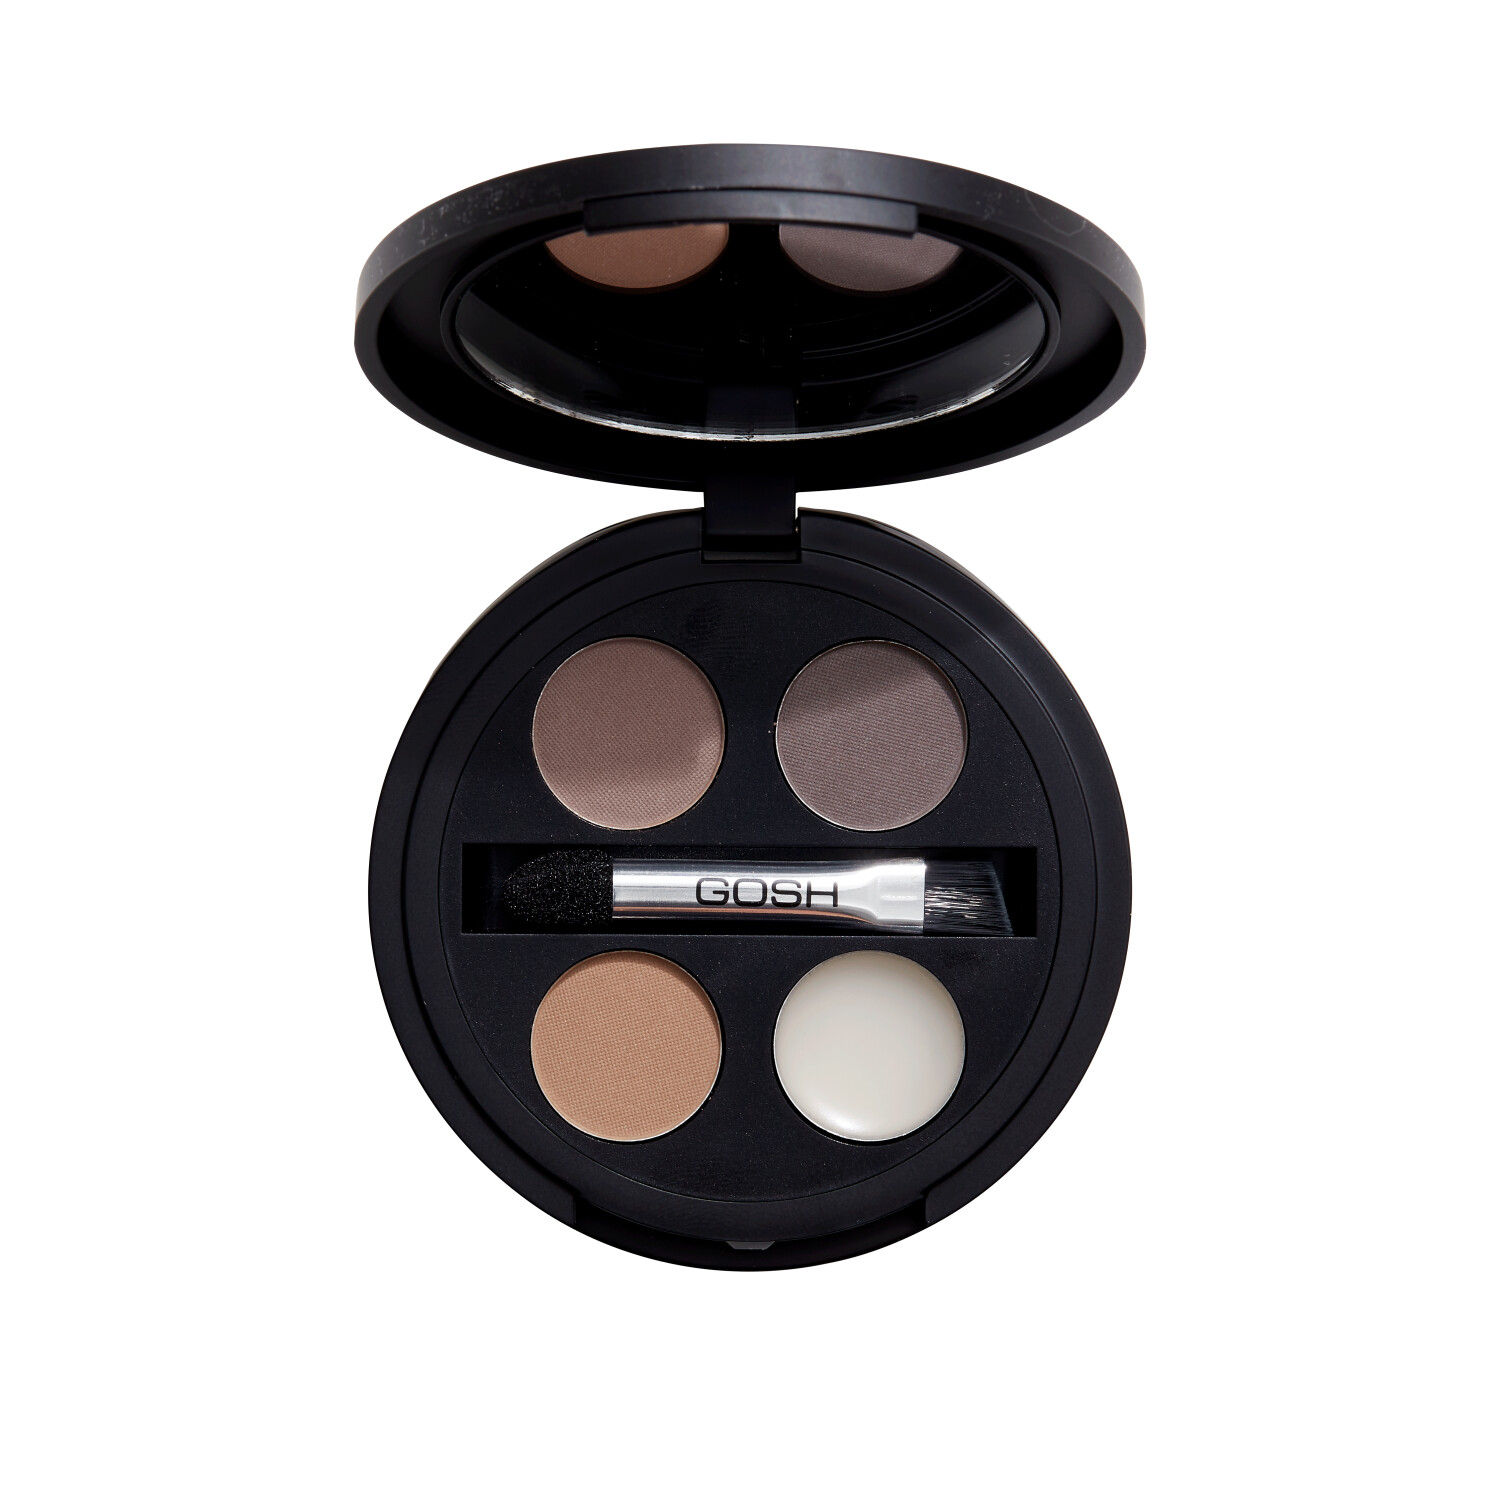 Buy Gosh Eye Brow Kit (3 g) from £7.42 (Today) – Best Deals on